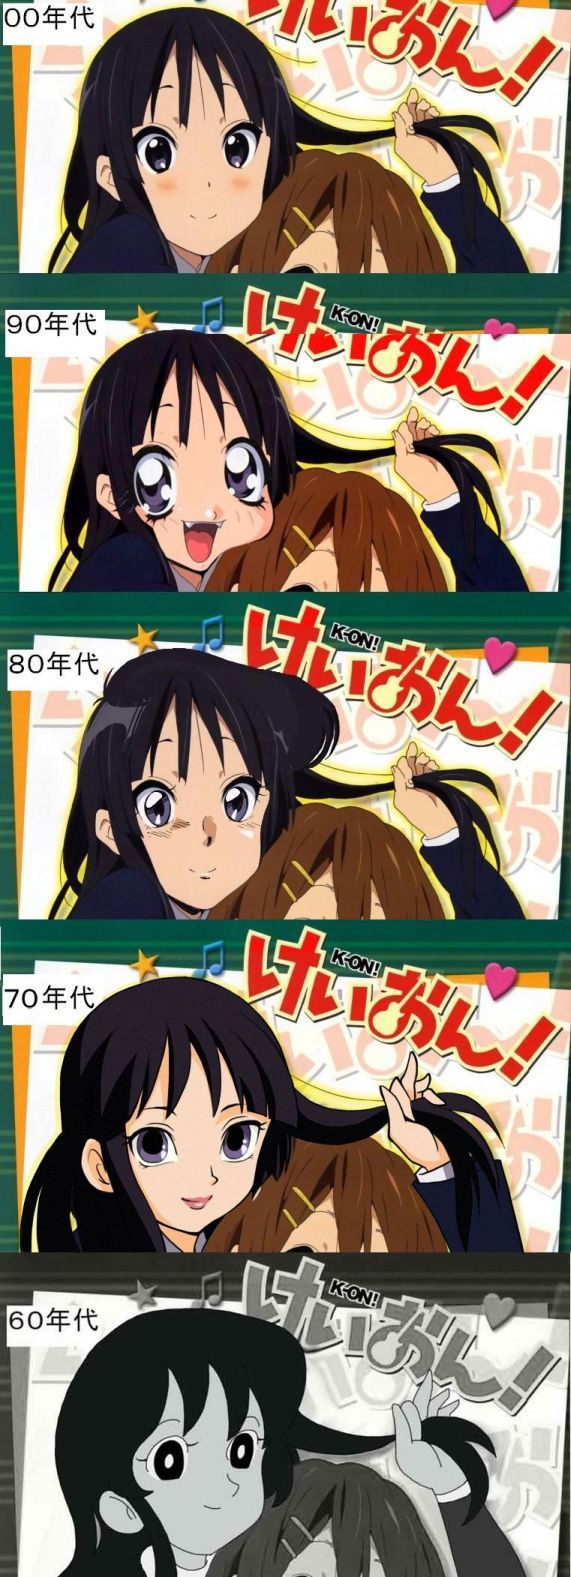 [k-On!] ] The music part heroine such as Yui-chan collection Photoshop summary part2 41